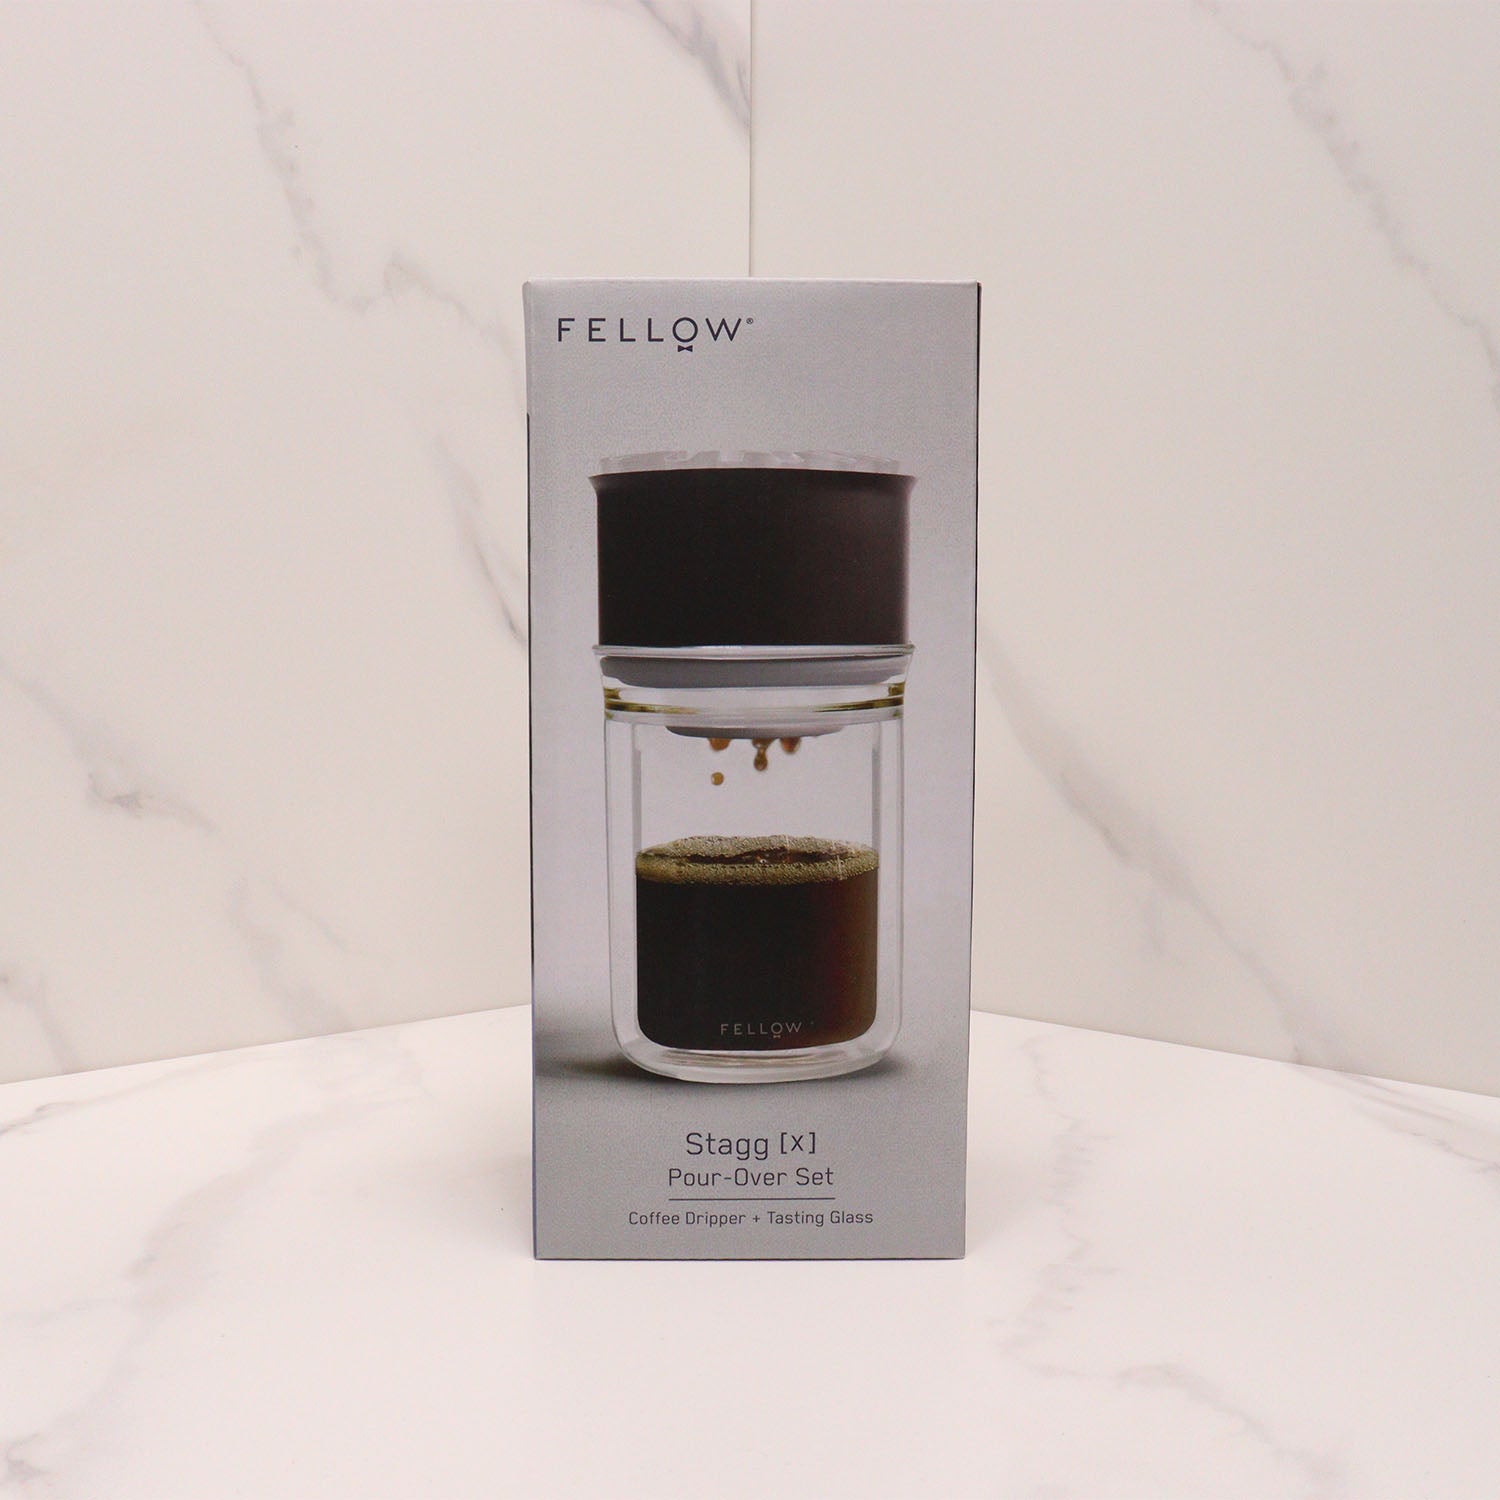 FELLOW STAGG (X) POUR-OVER SET